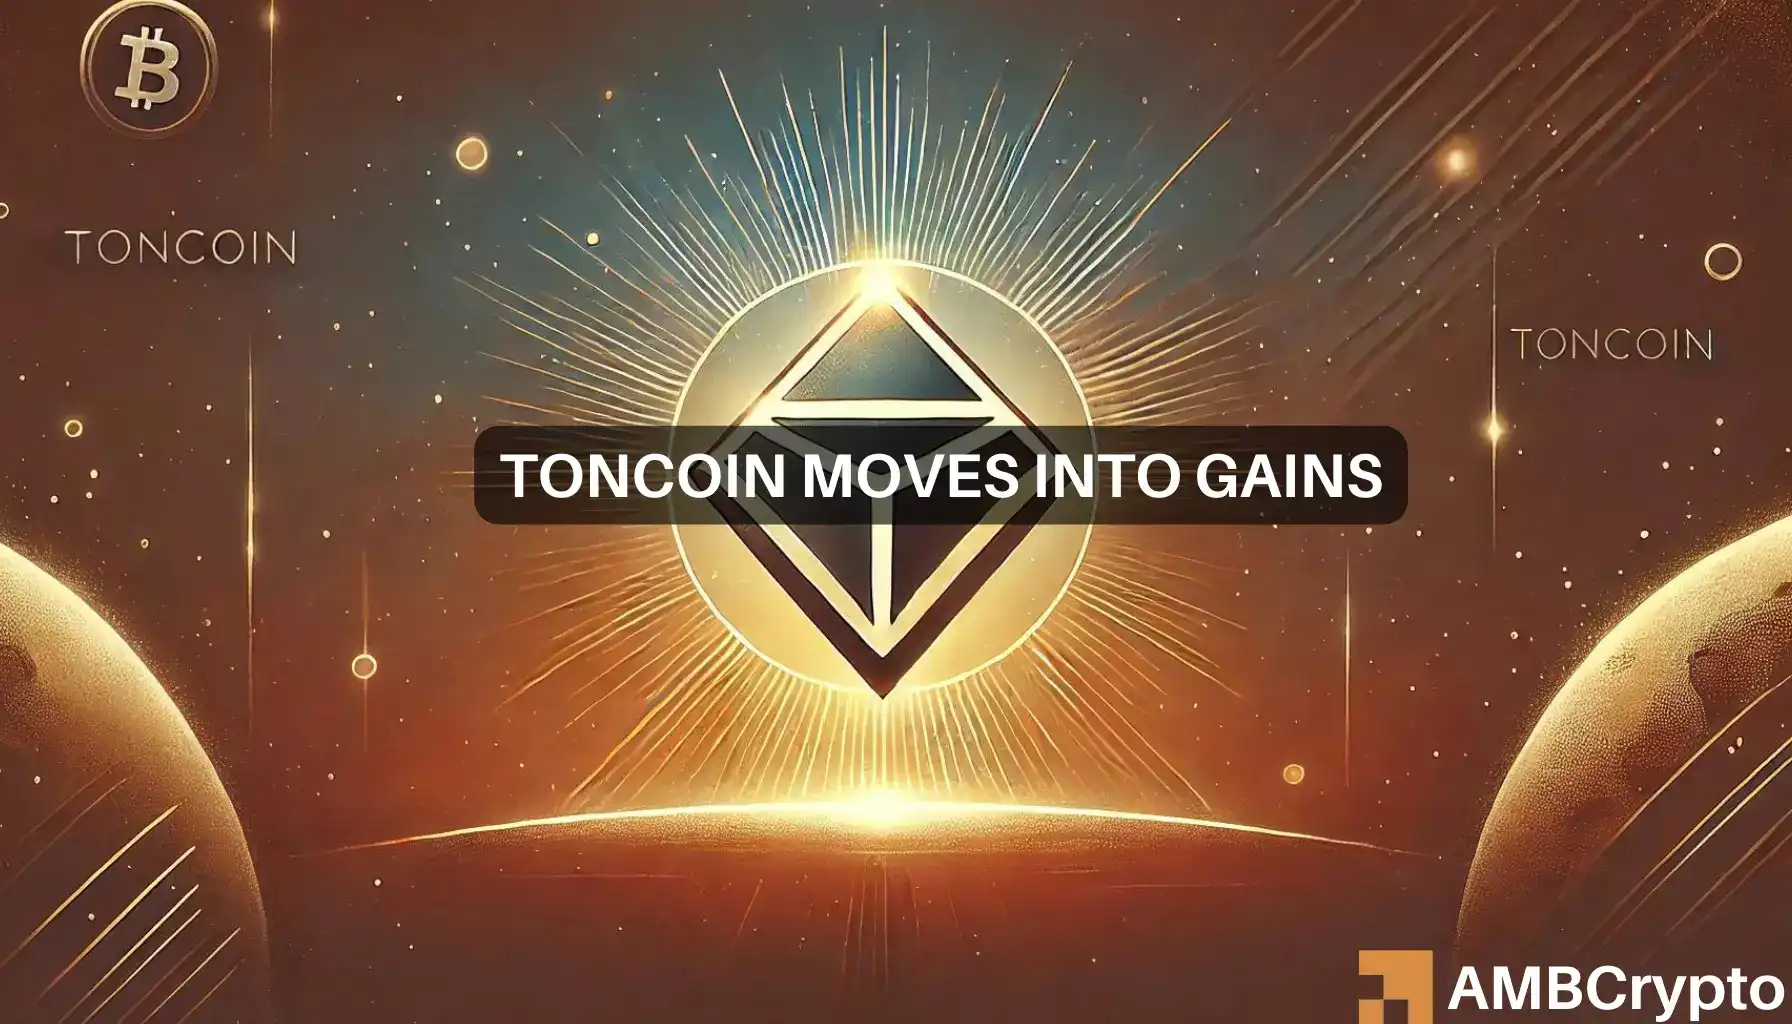 Toncoin’s 24-hour turnaround: Is TON on track for a rally?